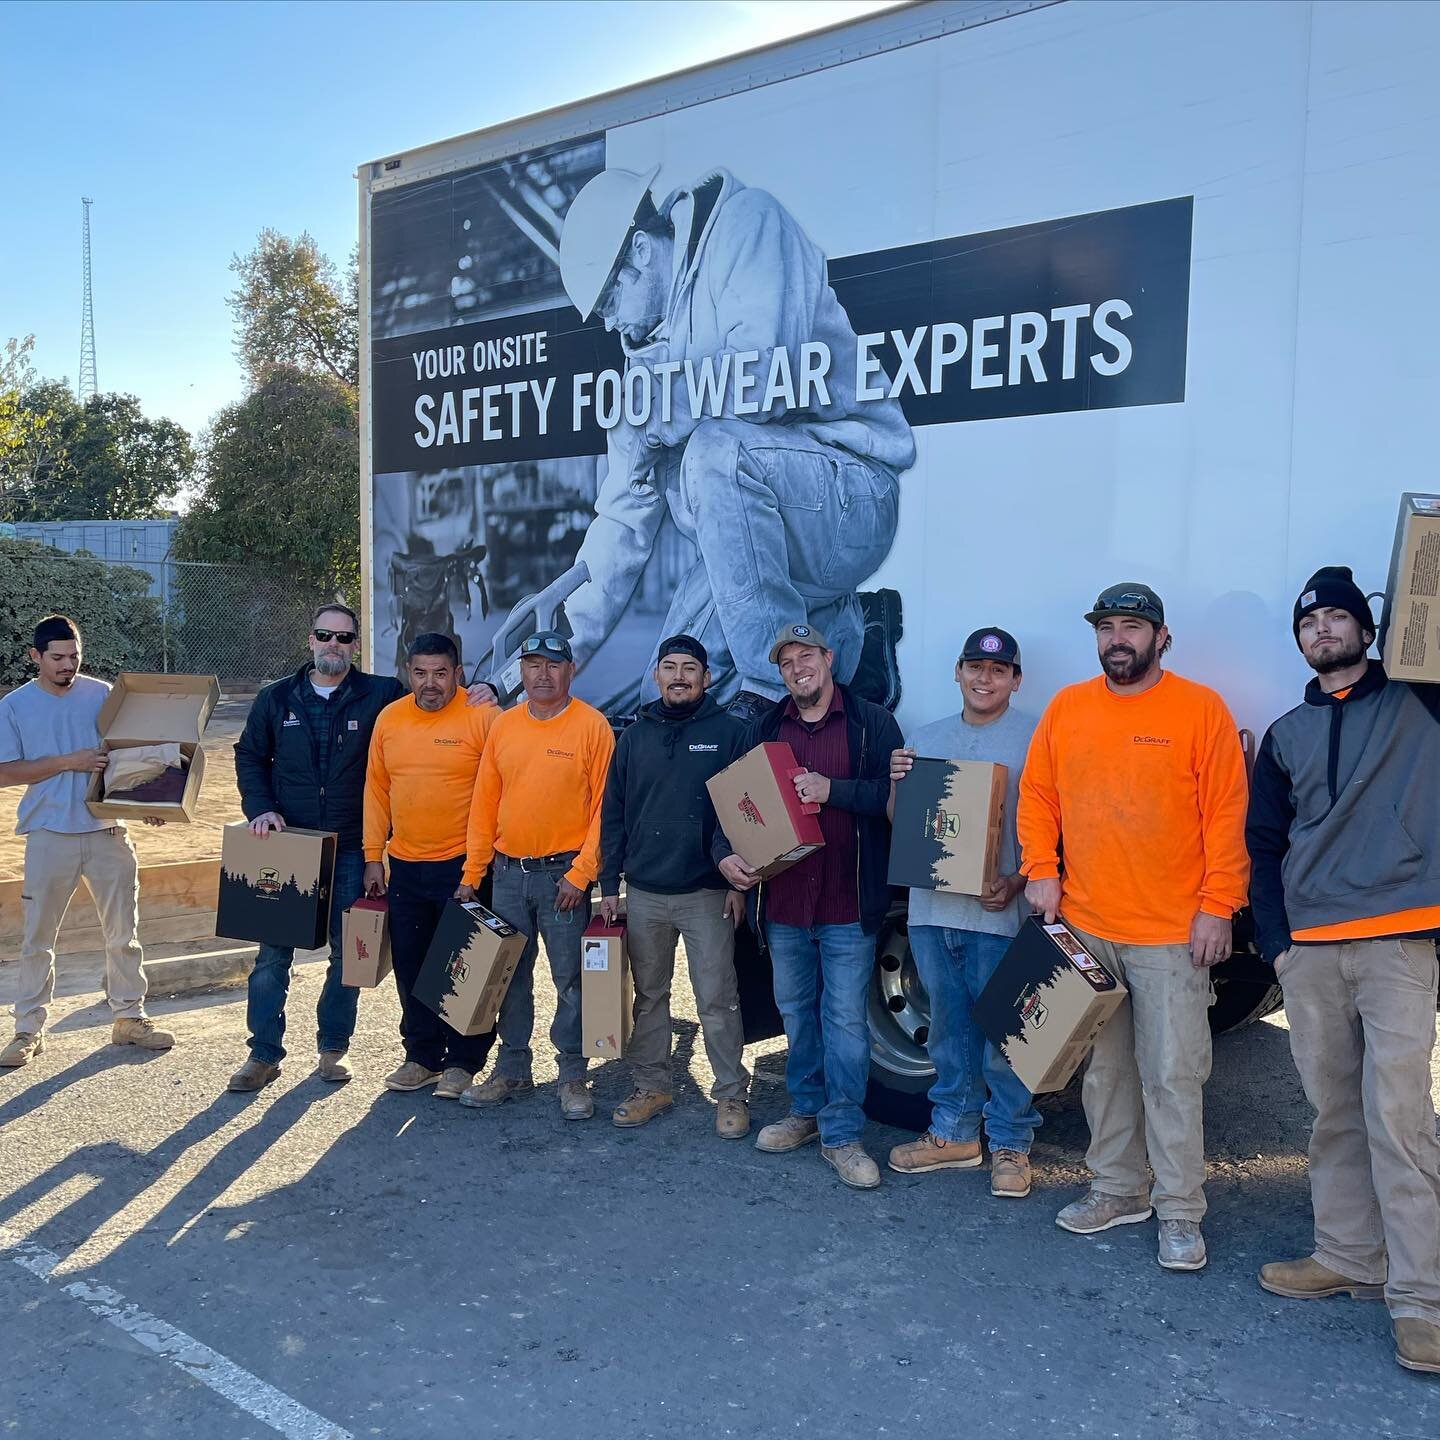 Out with the old&hellip; In with the new! The Boot Truck visited DeGraff Development today! 🥾❤️🥾 #degraffdevelopment #riponca #boottruck #generalcontractor